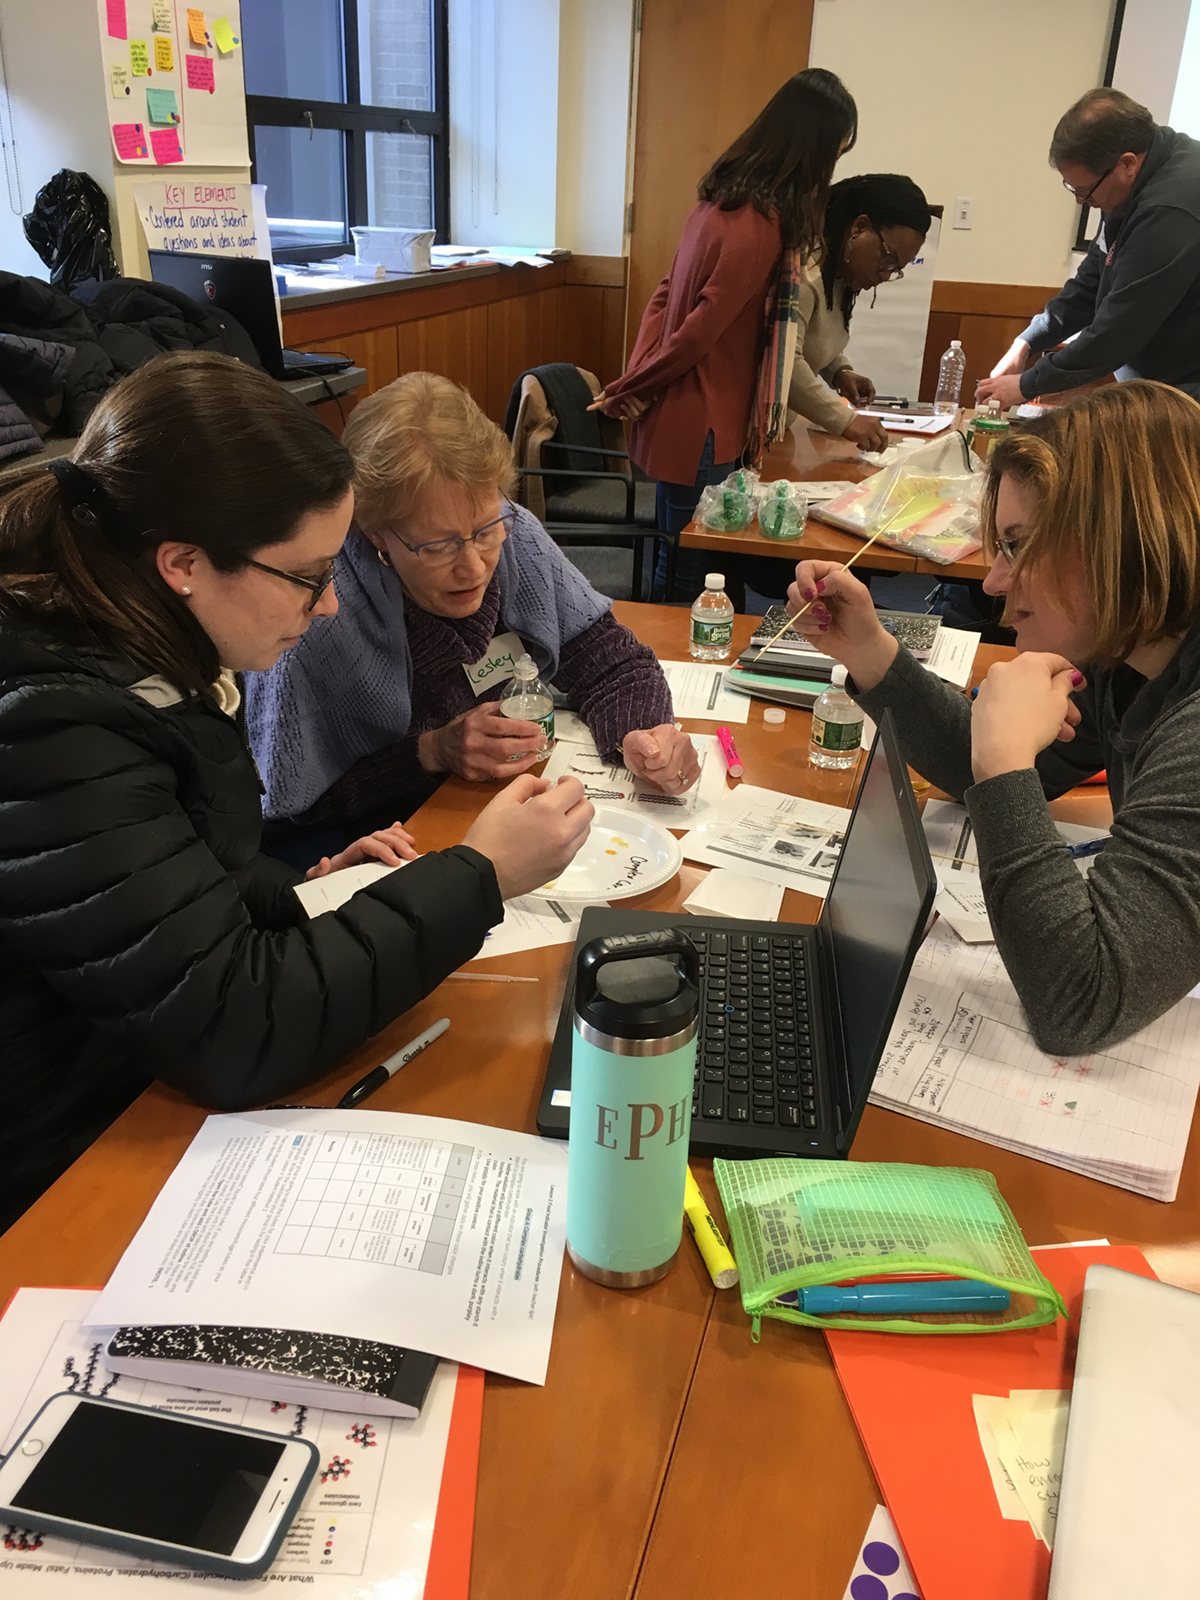 Teachers in a PD workshop make observations from the students’ perspective. Photo courtesy of the author.